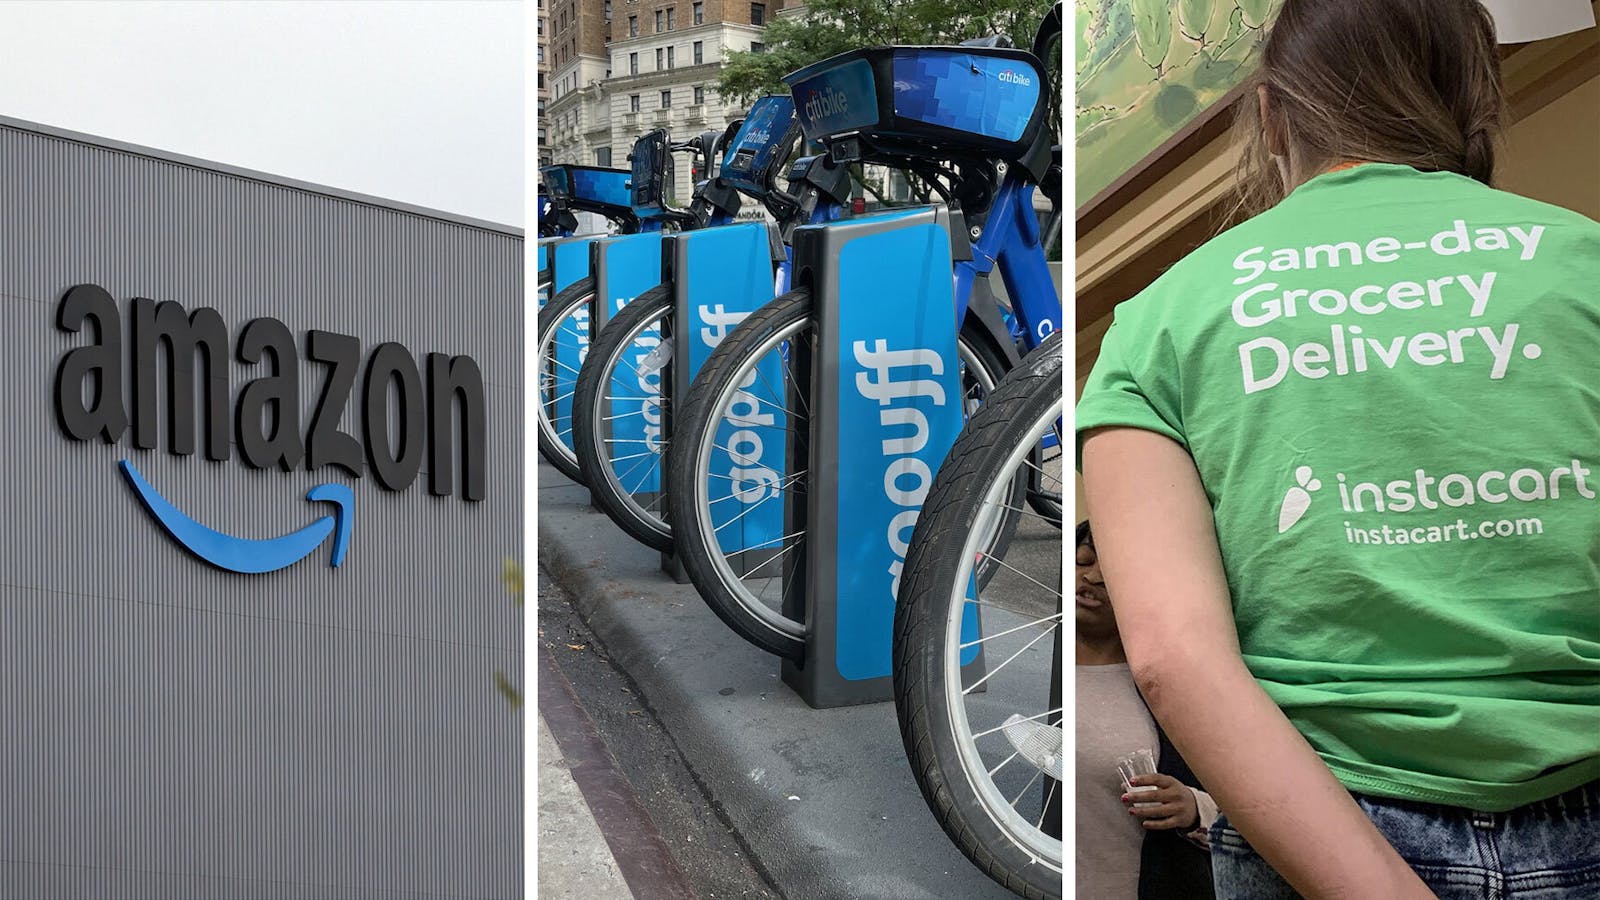 From left: An Amazon fulfillment center, GoPuff advertisements in NYC; Instacart workers in a grocery store. Photos by Bloomberg